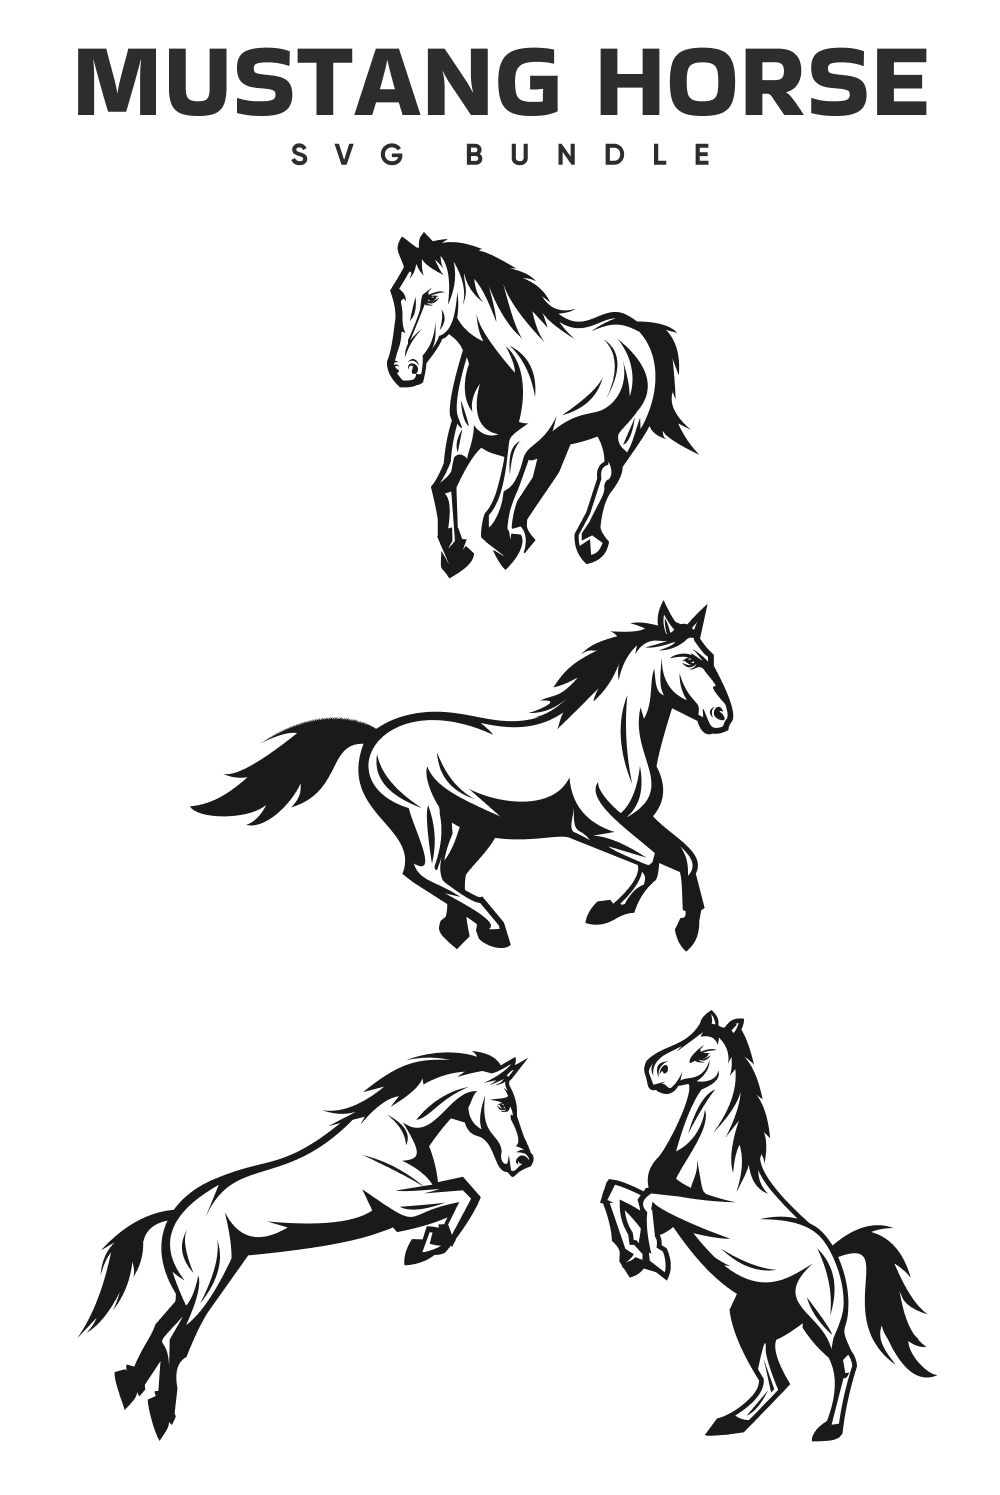 The mustang horse svg bundle.